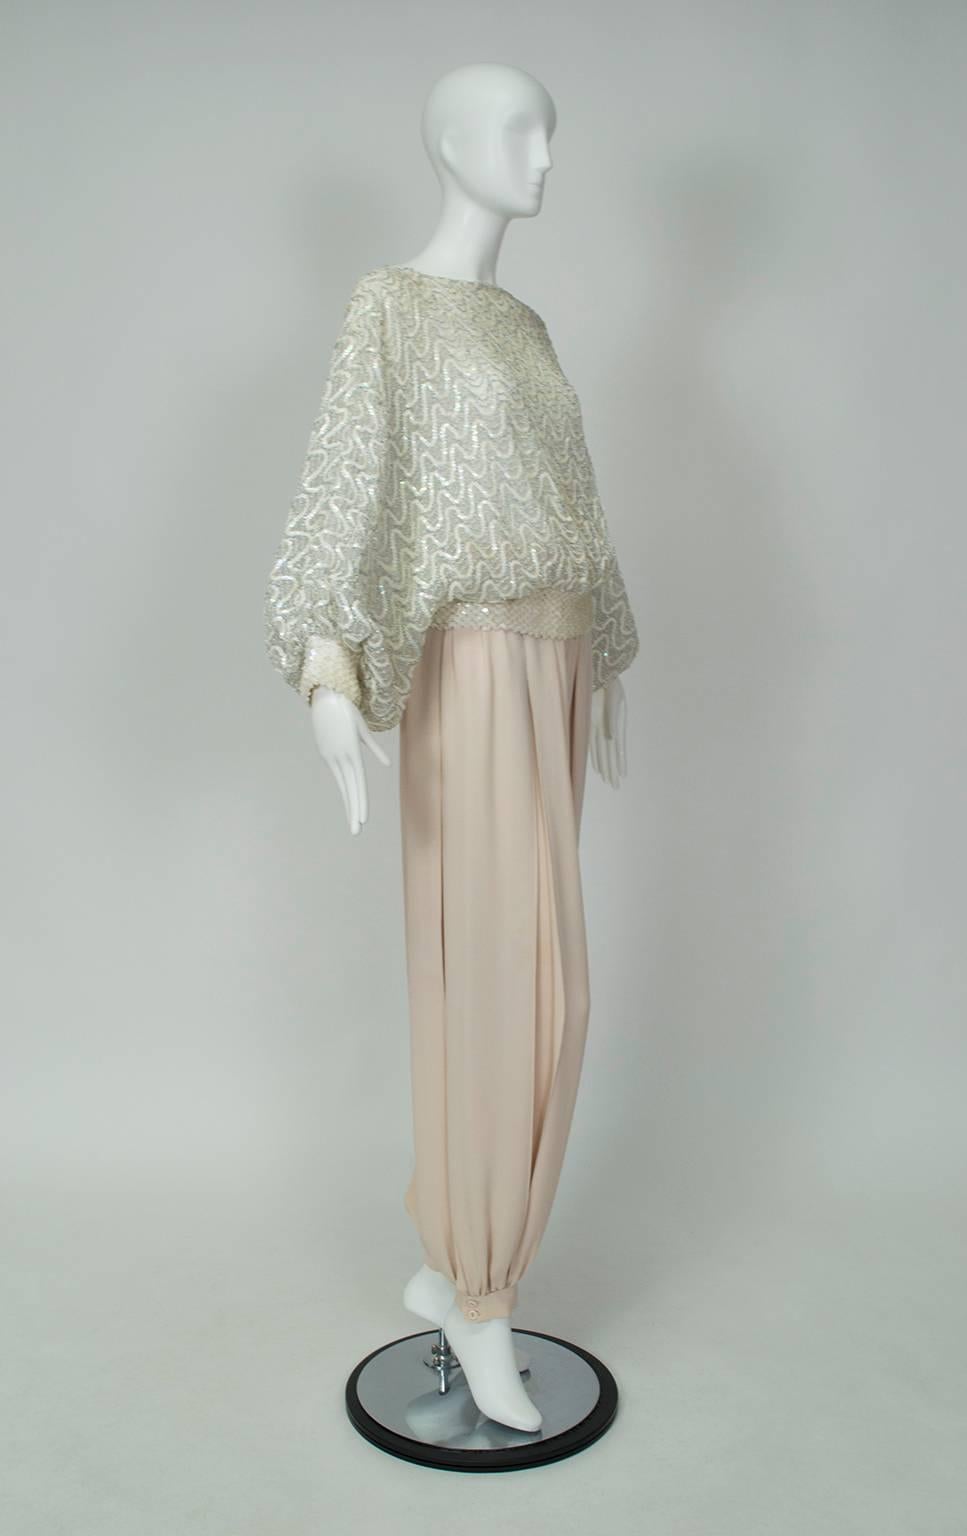 As festive and elegant as any party dress but as comfortable as pajamas, this ensemble conjures images of the Arabian Nights while remaining fashionably up-to-the-moment. Its soft, neutral color palette keeps the effect understated despite using